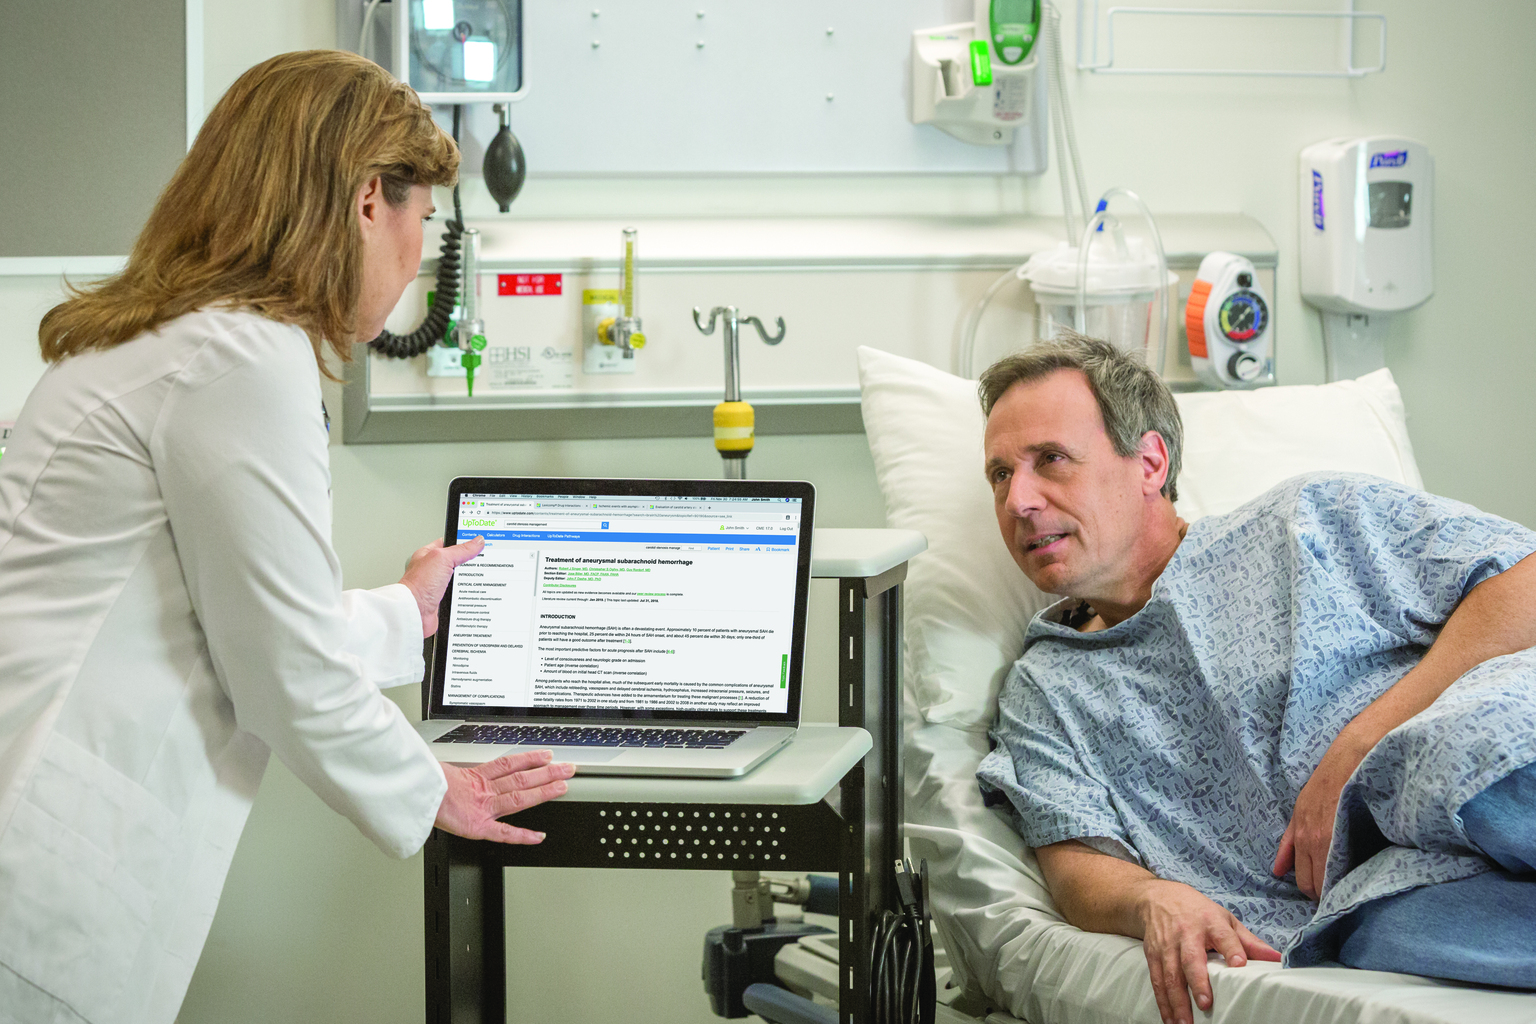 Doctor and patient in hospital room, doctor using UpToDate on laptop